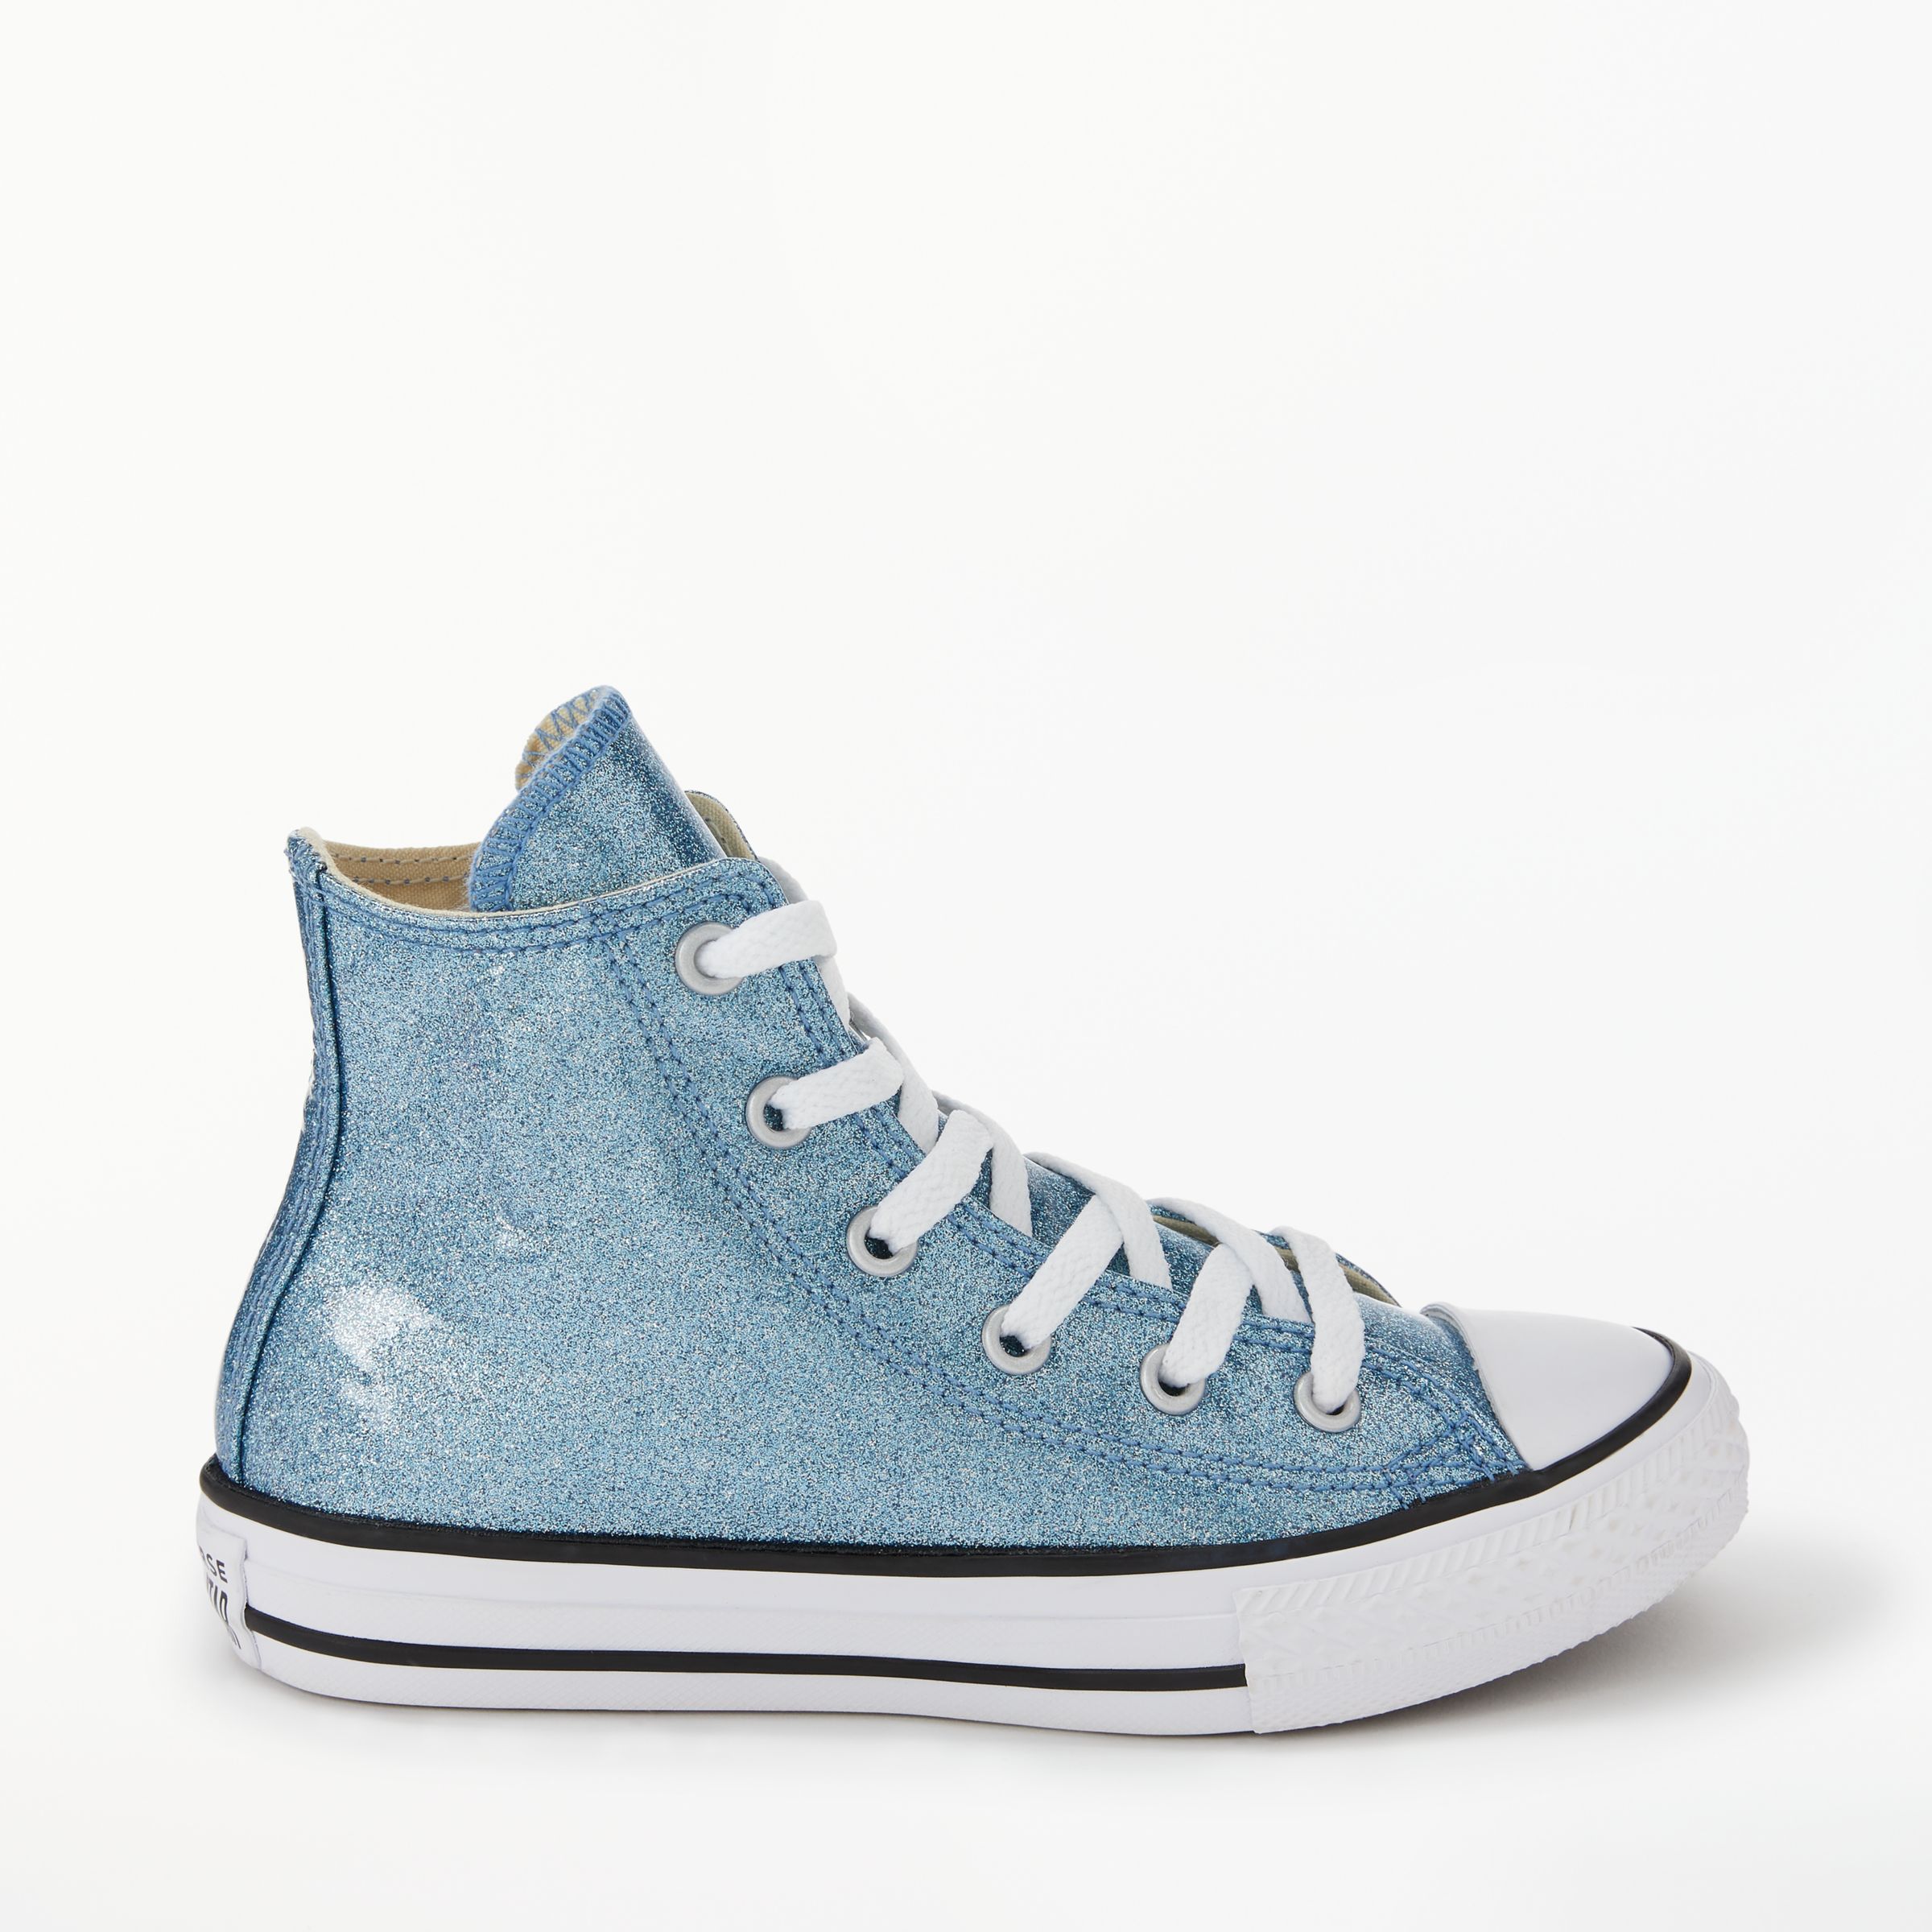 Converse Chuck Taylor All Star Core Hi-Top Trainers, Blue